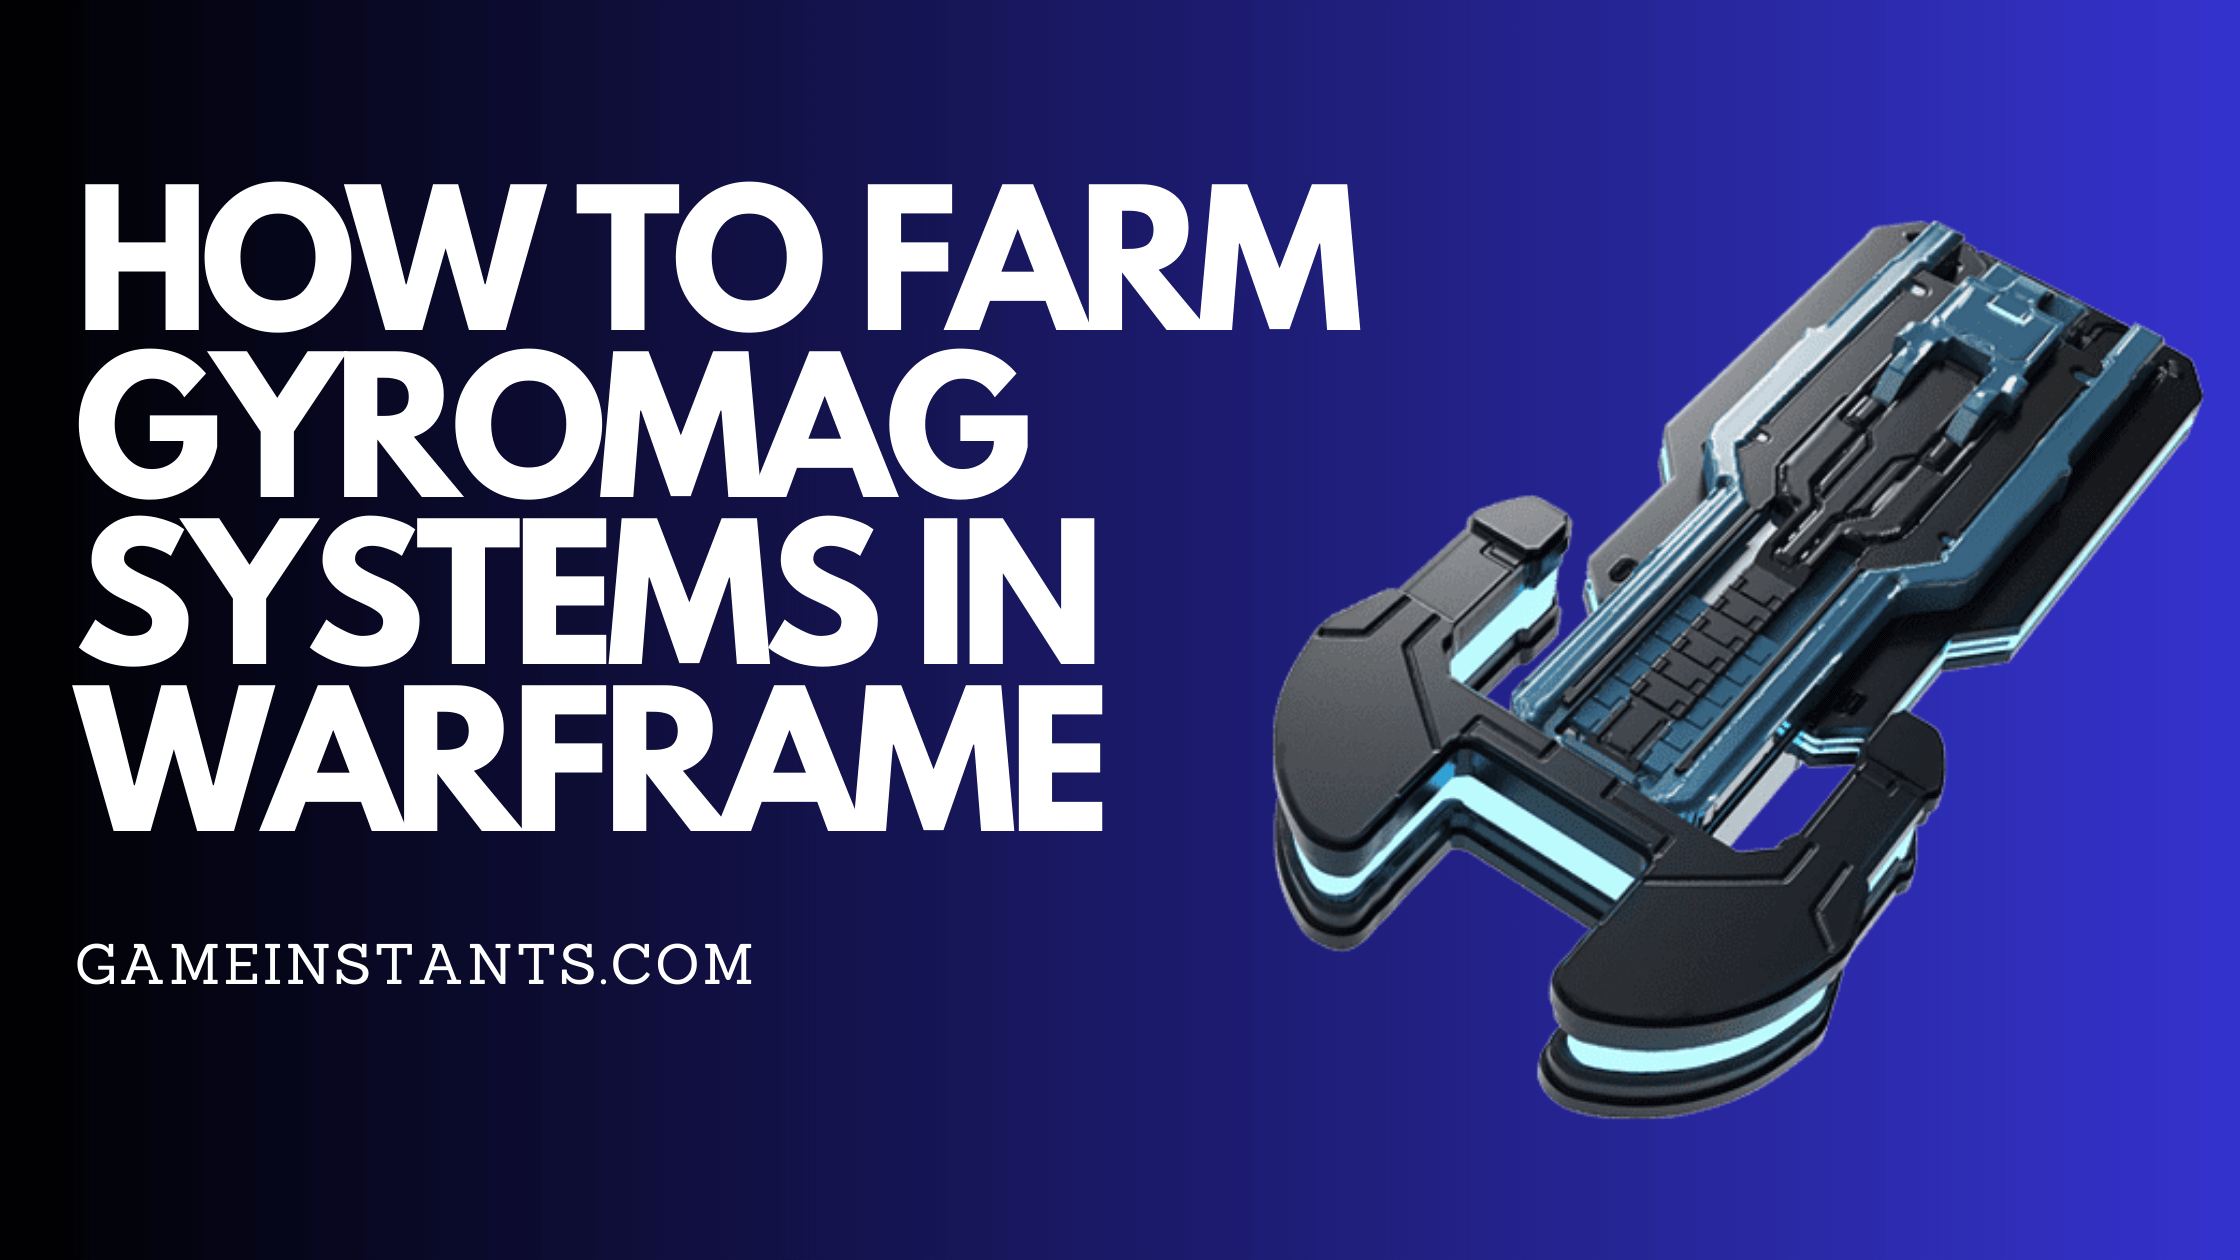 How To Farm Gyromag Systems in Warframe